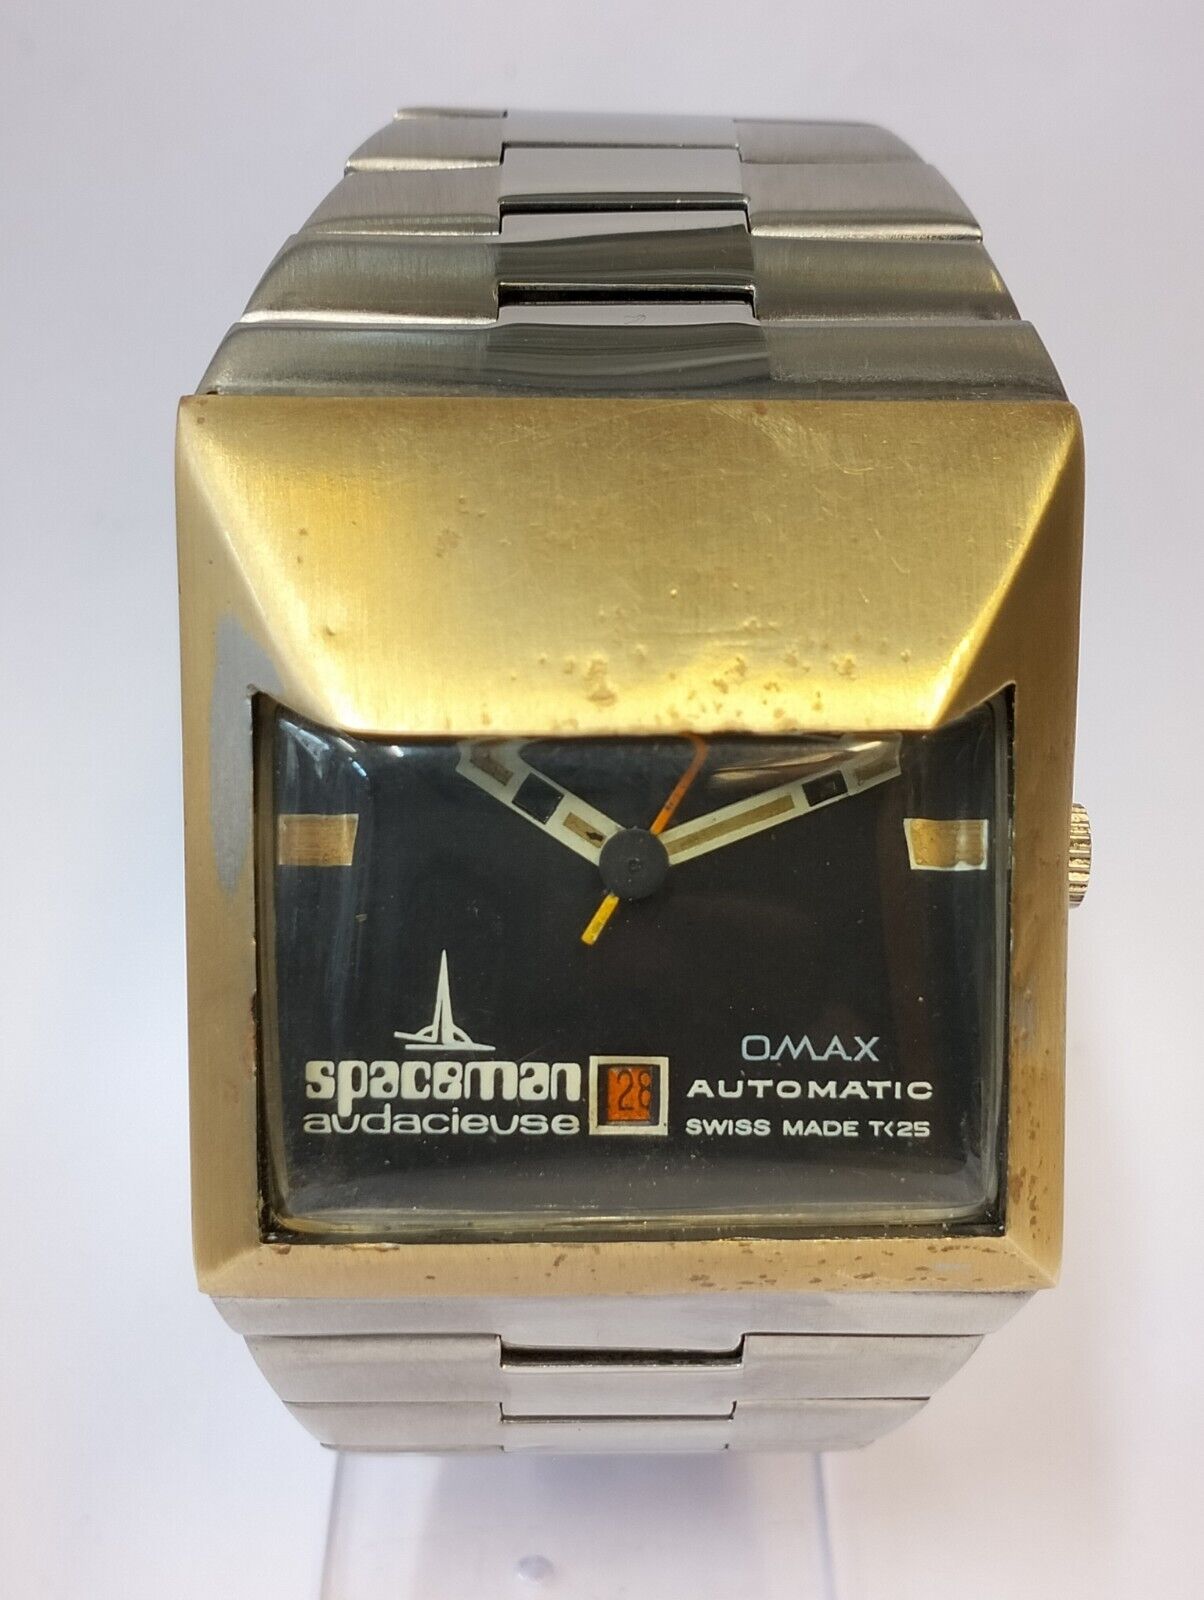 OMAX SPACEMAN AUDACIEUSE AGED CASE AUTOMATIC 46617/7 SWISS MEN FULL WORKING VTG.